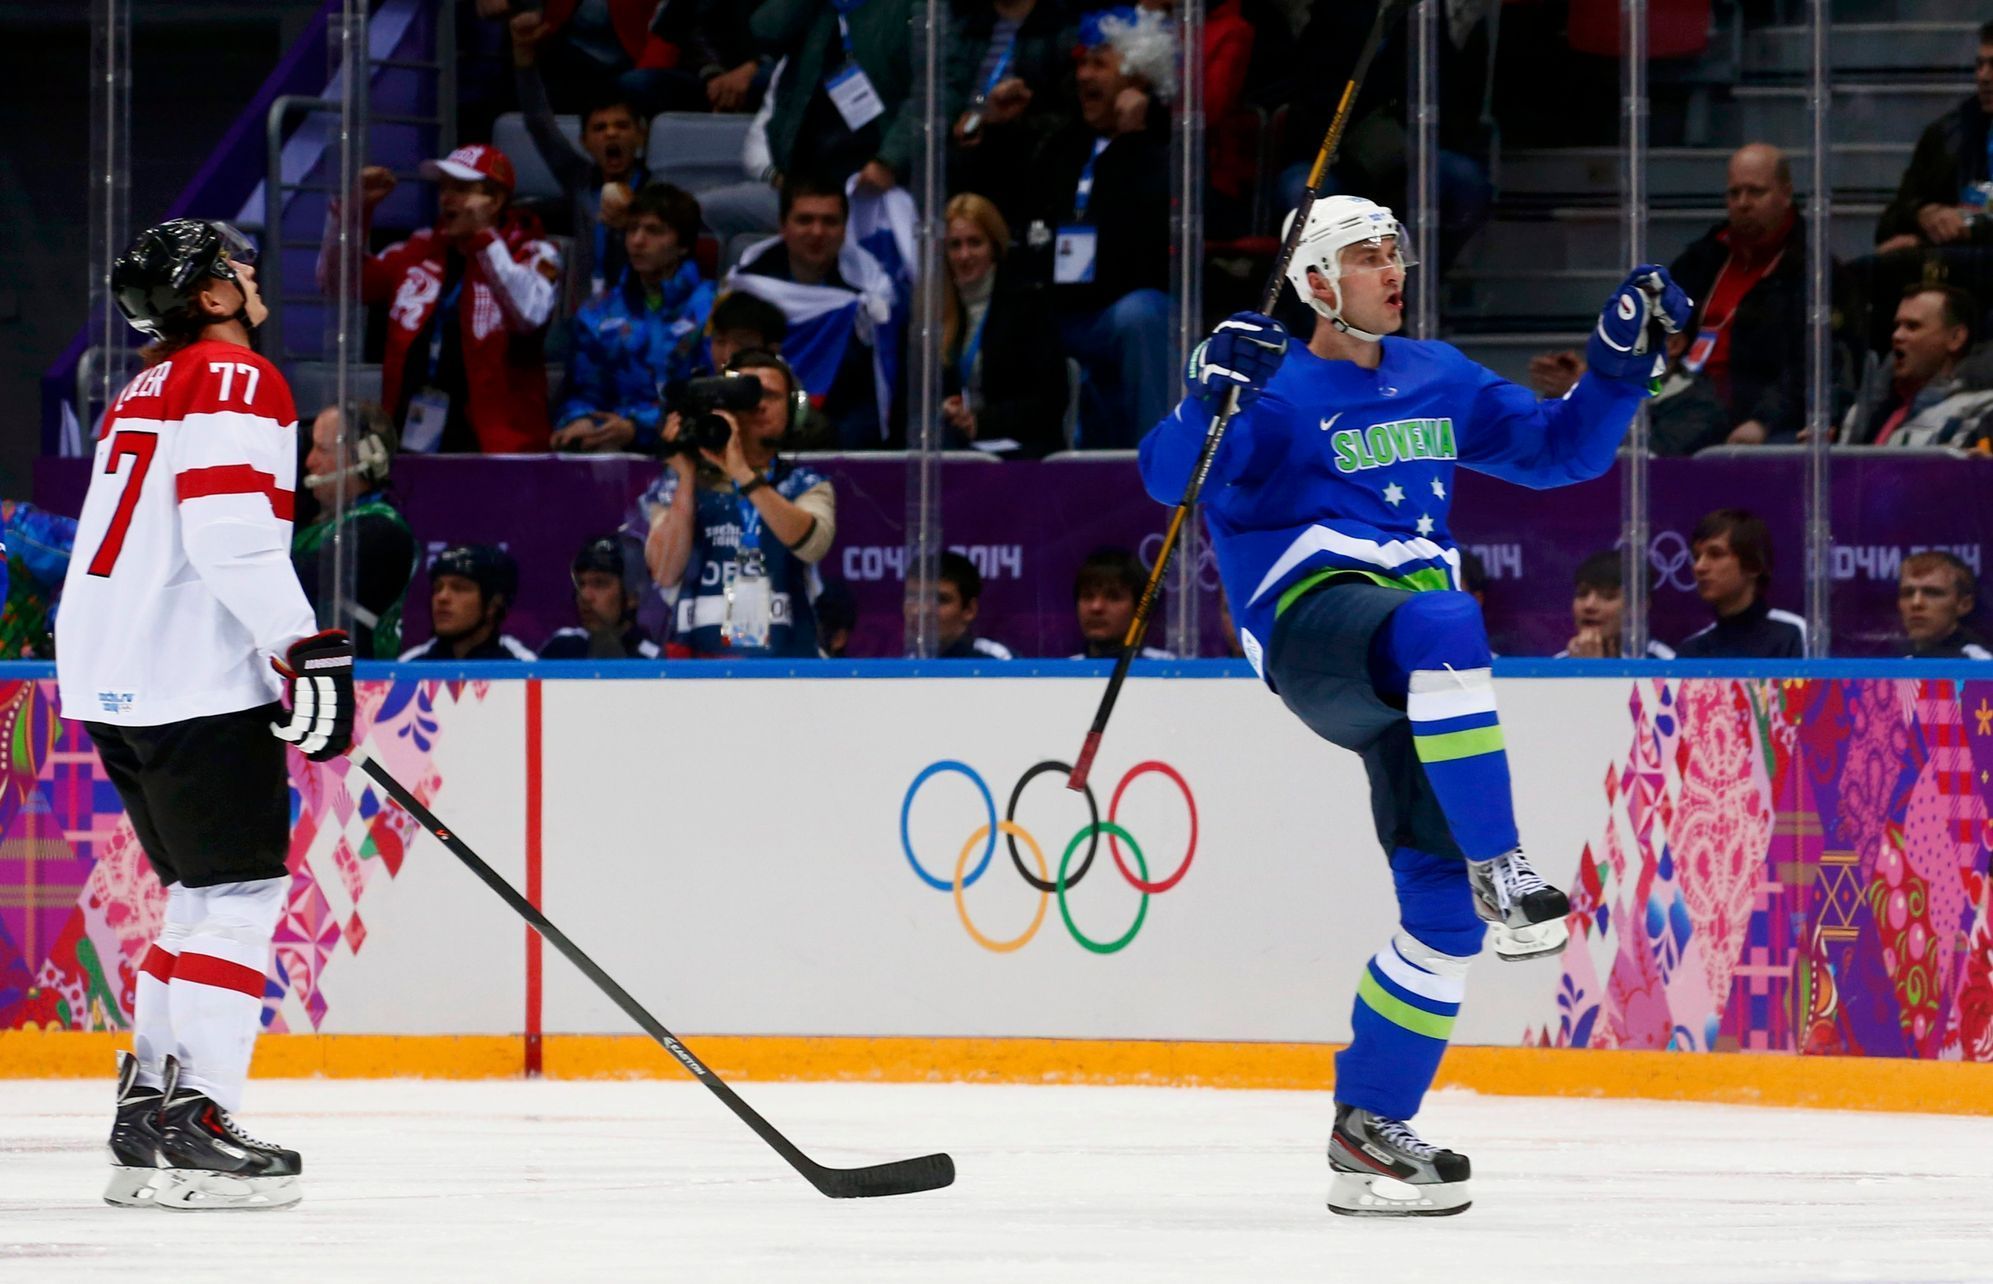 Slovenia's Kovacevic celebrates his goal as Austria's Lebler reacts during second period of their men's ice hockey playoffs qualification game at 2014 Sochi Winter Olympics